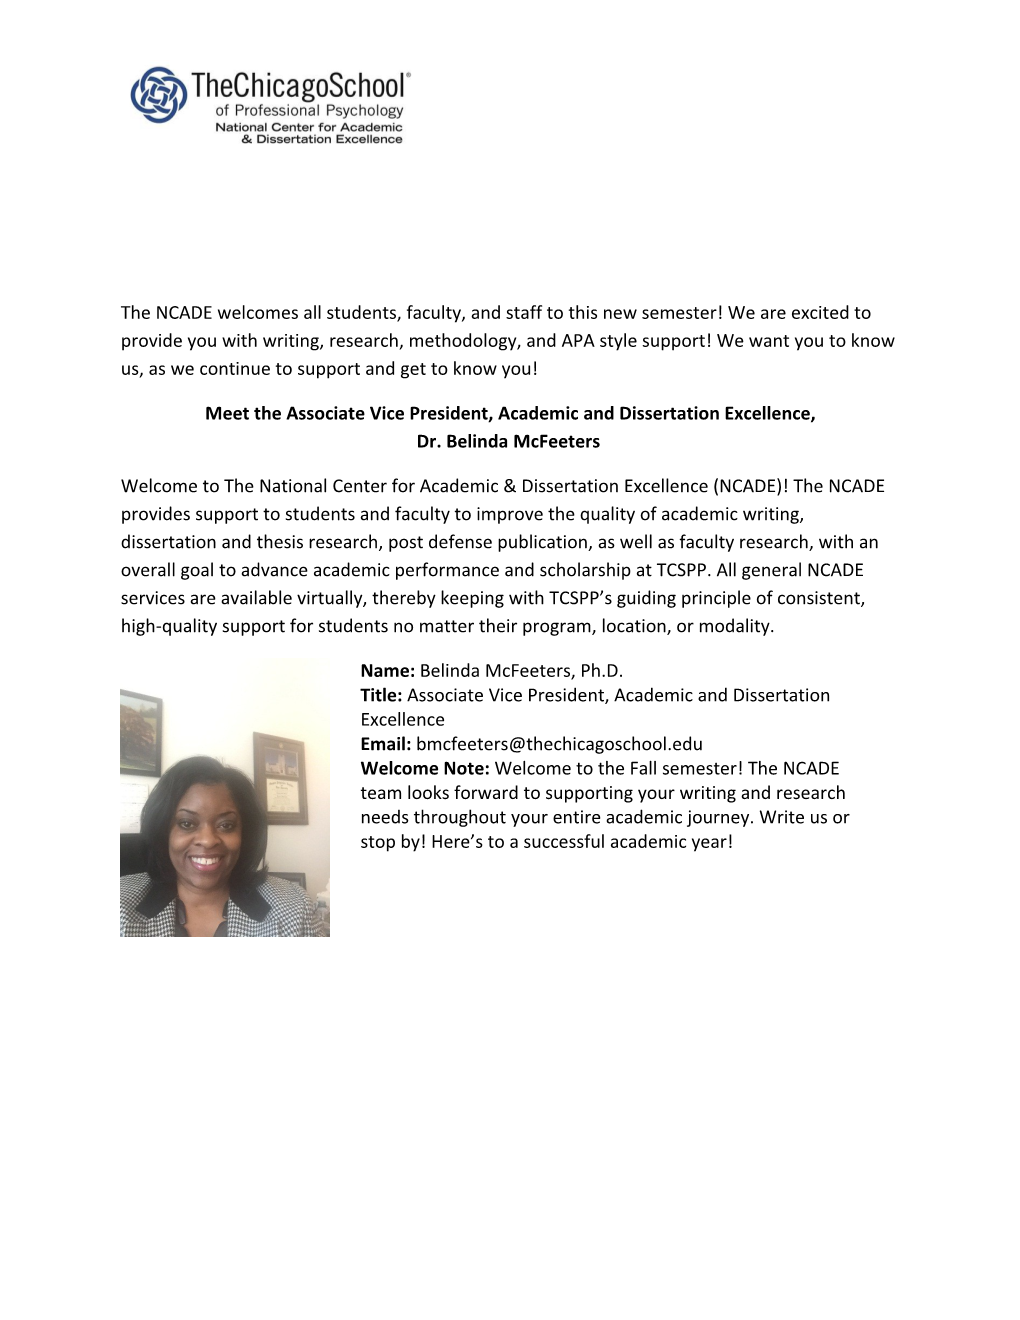 Meet the Associate Vice President, Academic and Dissertation Excellence, Dr. Belinda Mcfeeters